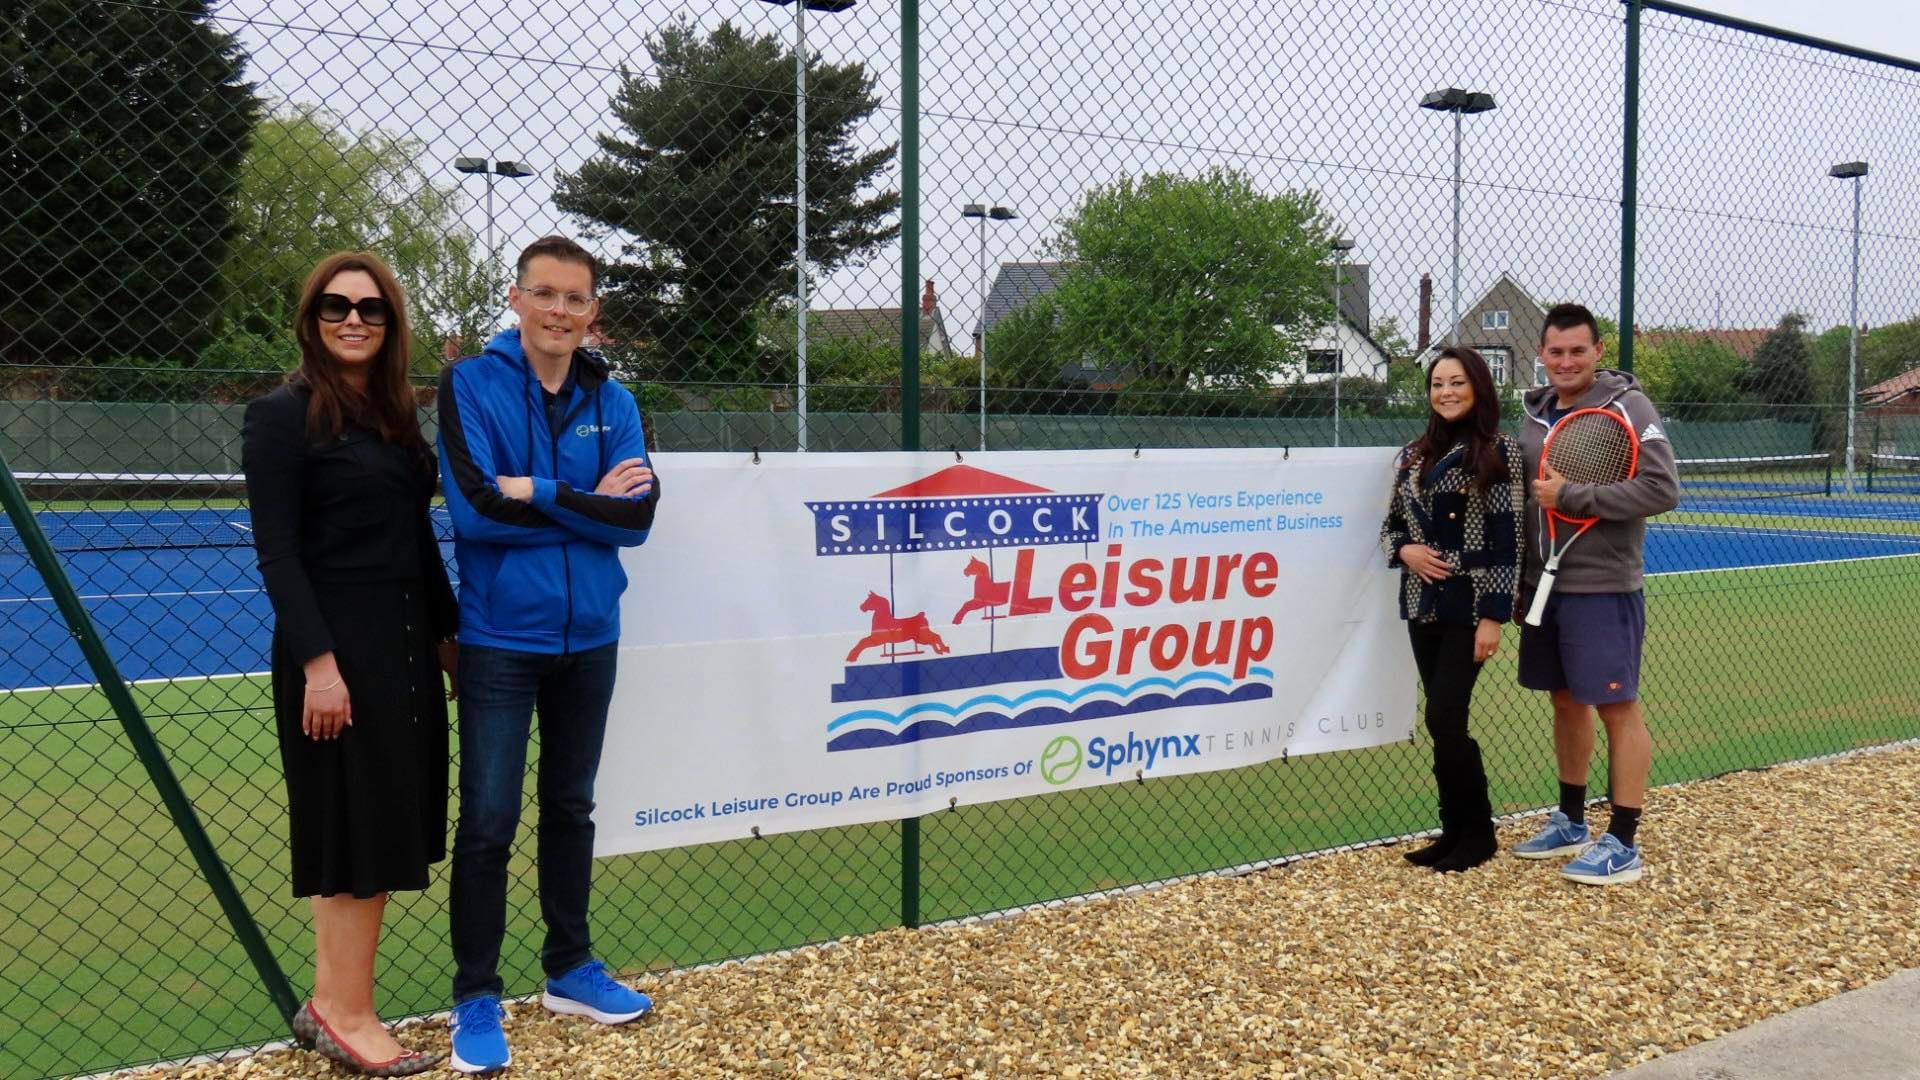 Over a quarter of a million pounds has been invested in creating some of the best tennis courts in the North West at Sphynx Tennis Club in Southport. Jamie Blundell and Chris Parkes from the tennis club with Serena and Taryn Silcock from Silcock Leisure Group. 